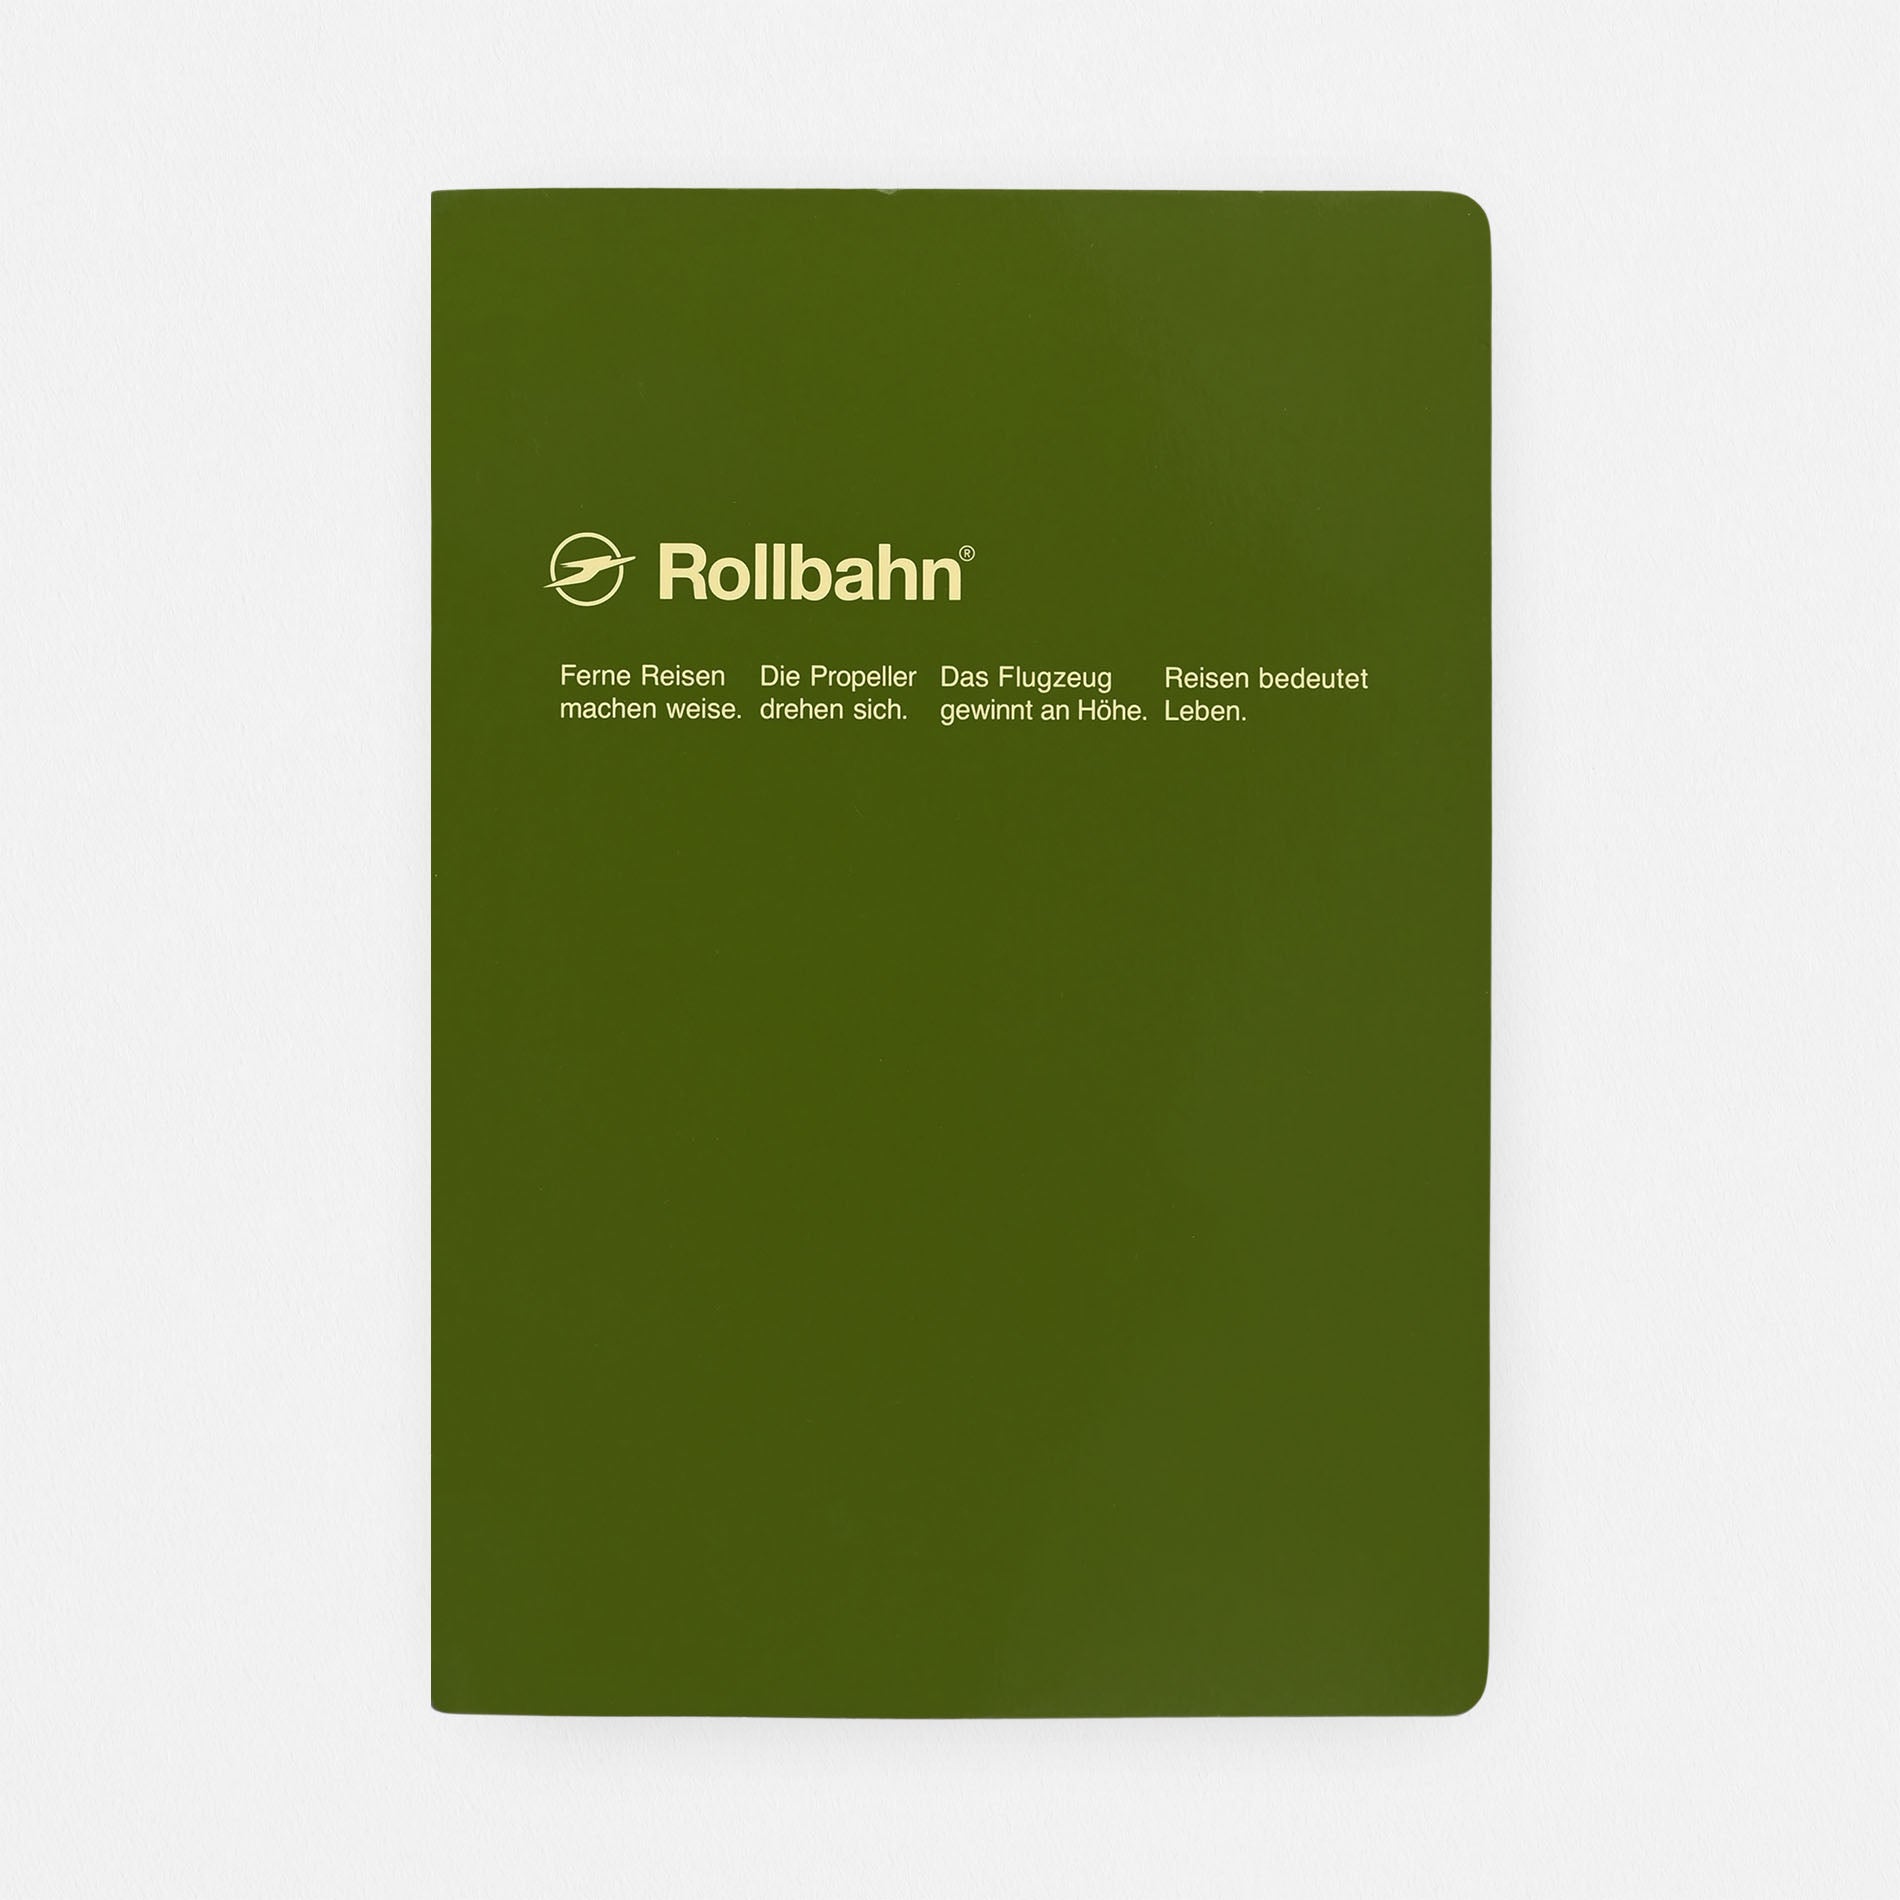 Delfonics Rollbahn "Note" Notebook Pocket, Large, A5 Or Extra Large  | 10 Colors Olive / Pocket A6 ( 4 x 6")